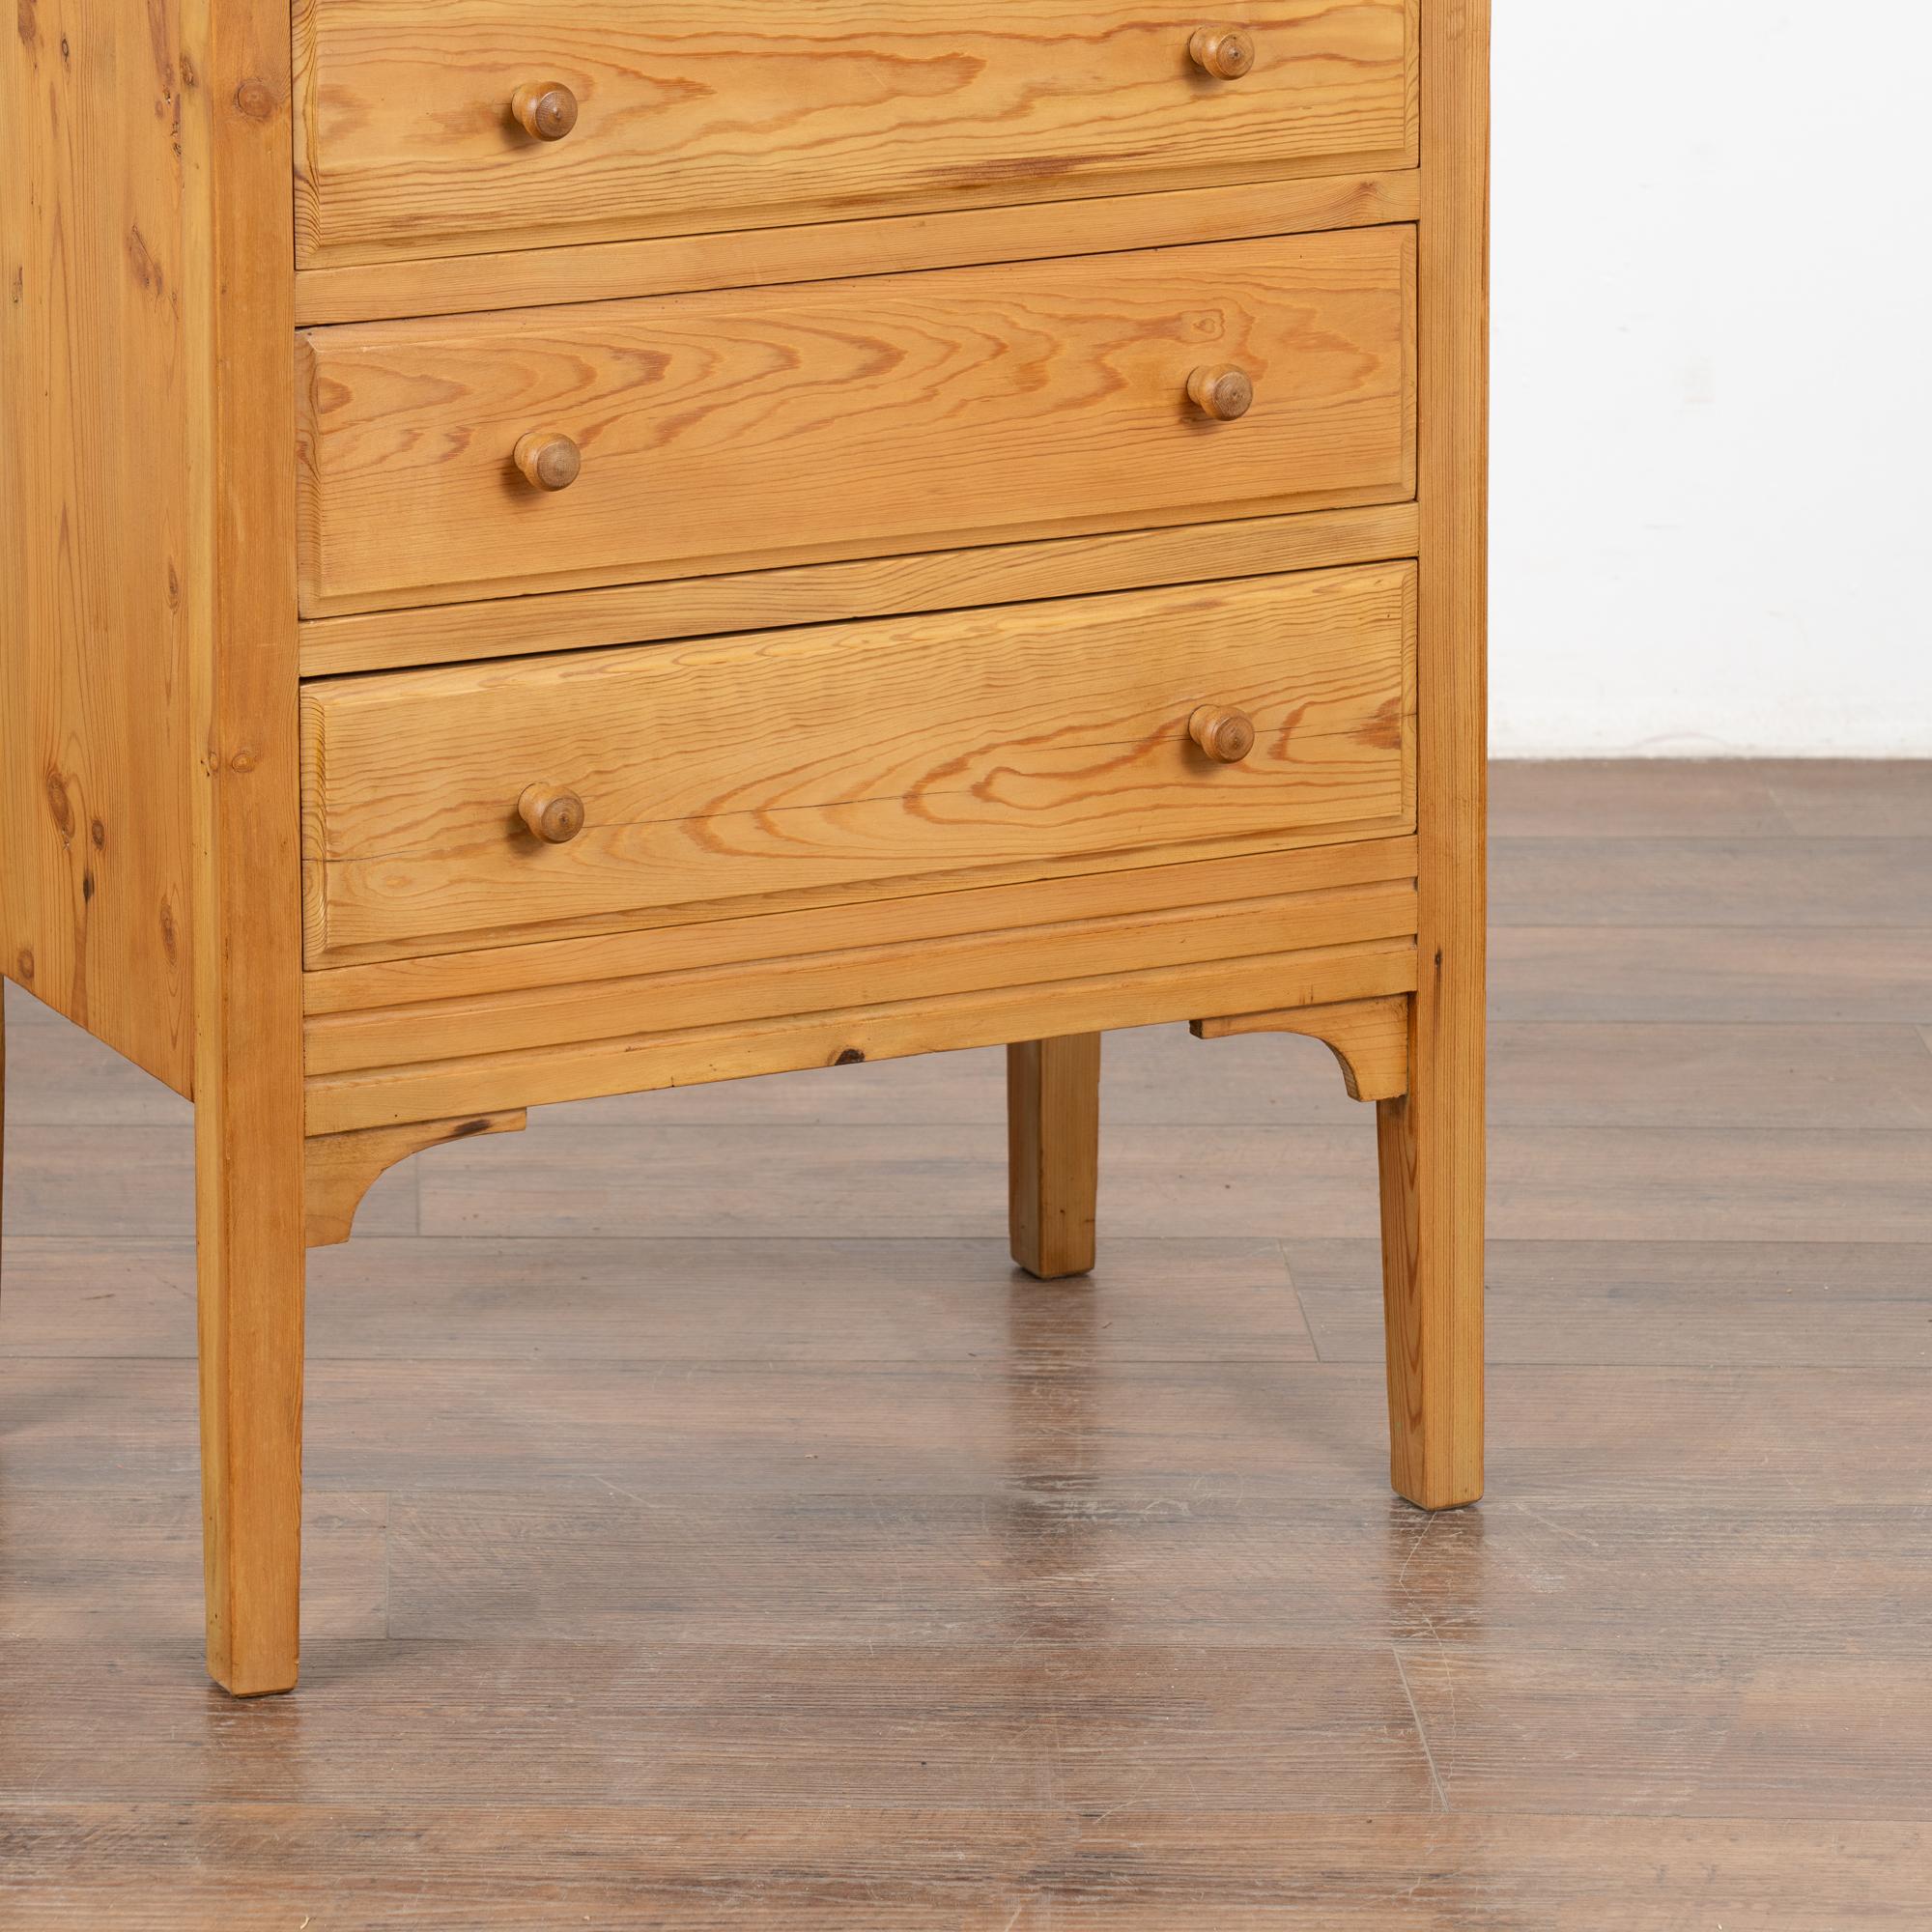 Vintage Pine Small Chest of Drawers Nightstand, Denmark circa 1940 For Sale 2